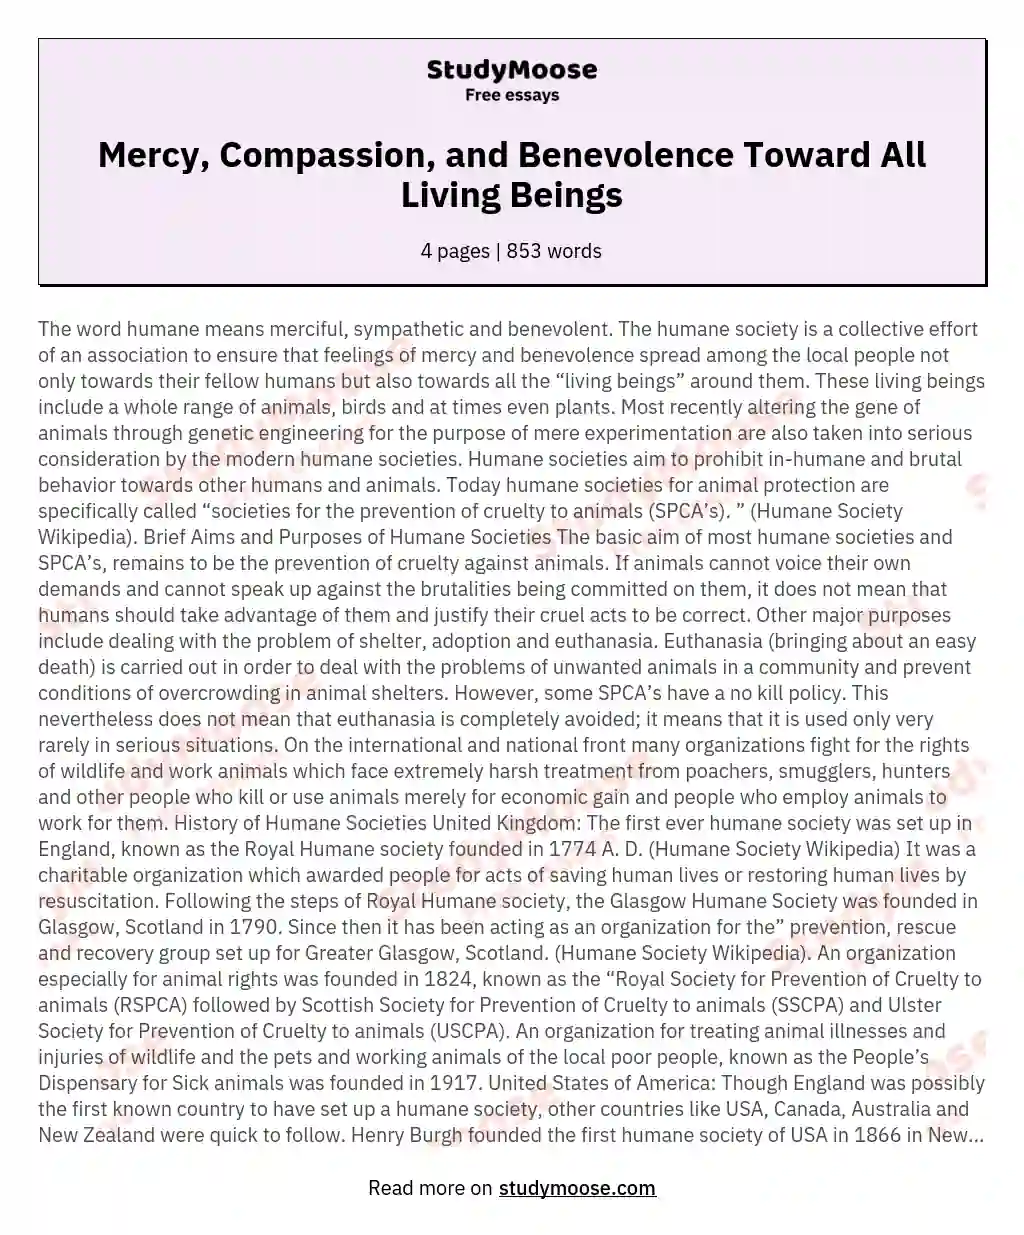 Mercy, Compassion, and Benevolence Toward All Living Beings essay